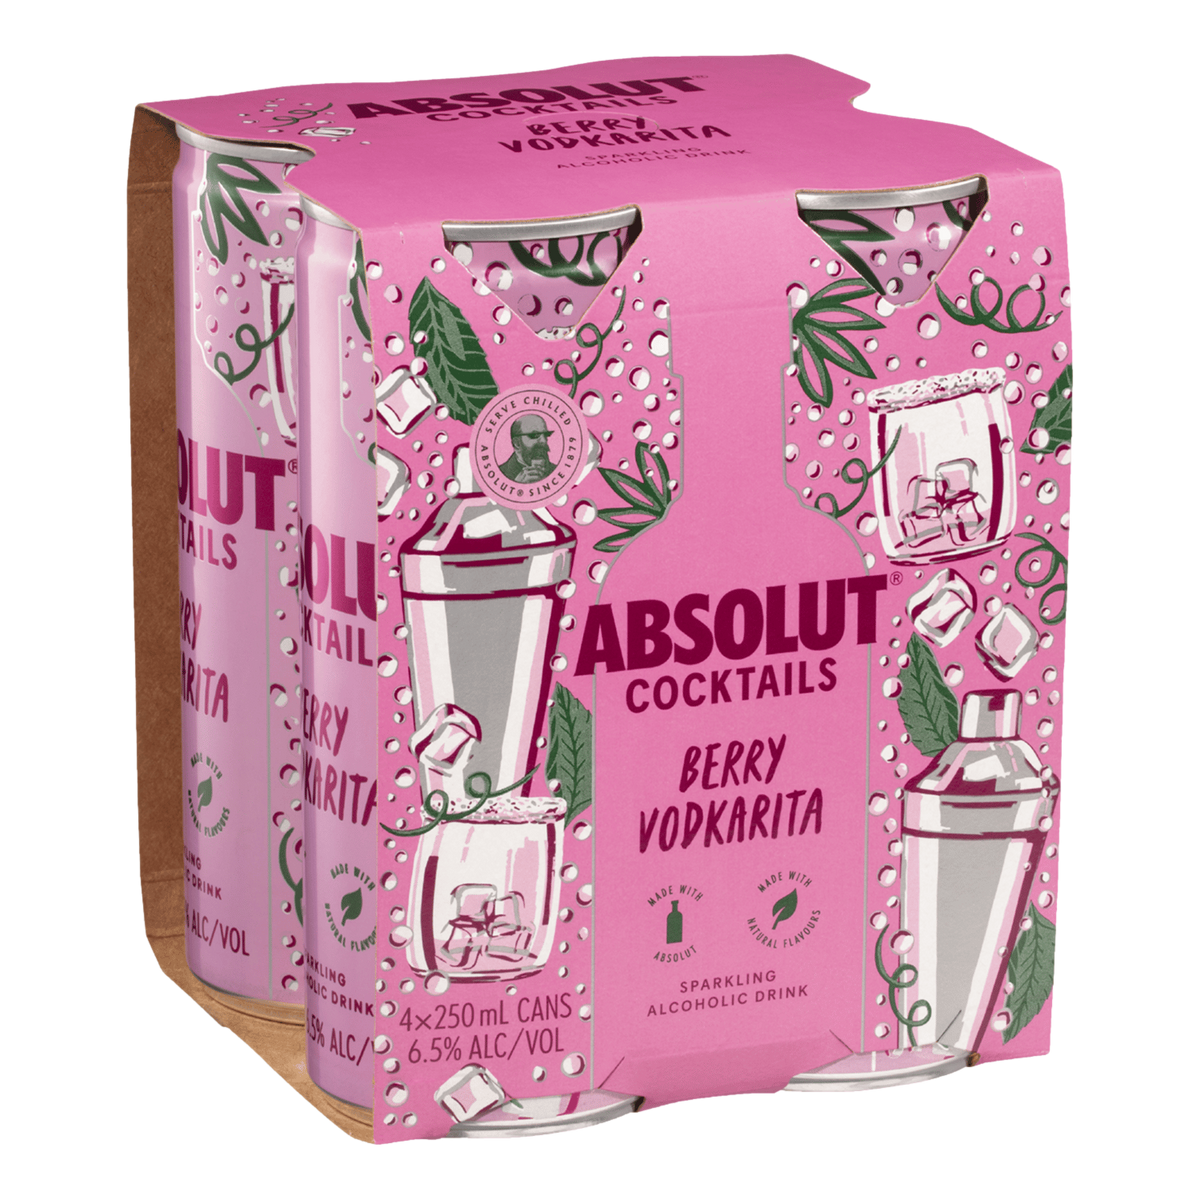 Absolut Cocktails Berry Vodkarita 6.5% 250ml Can 4 Pack